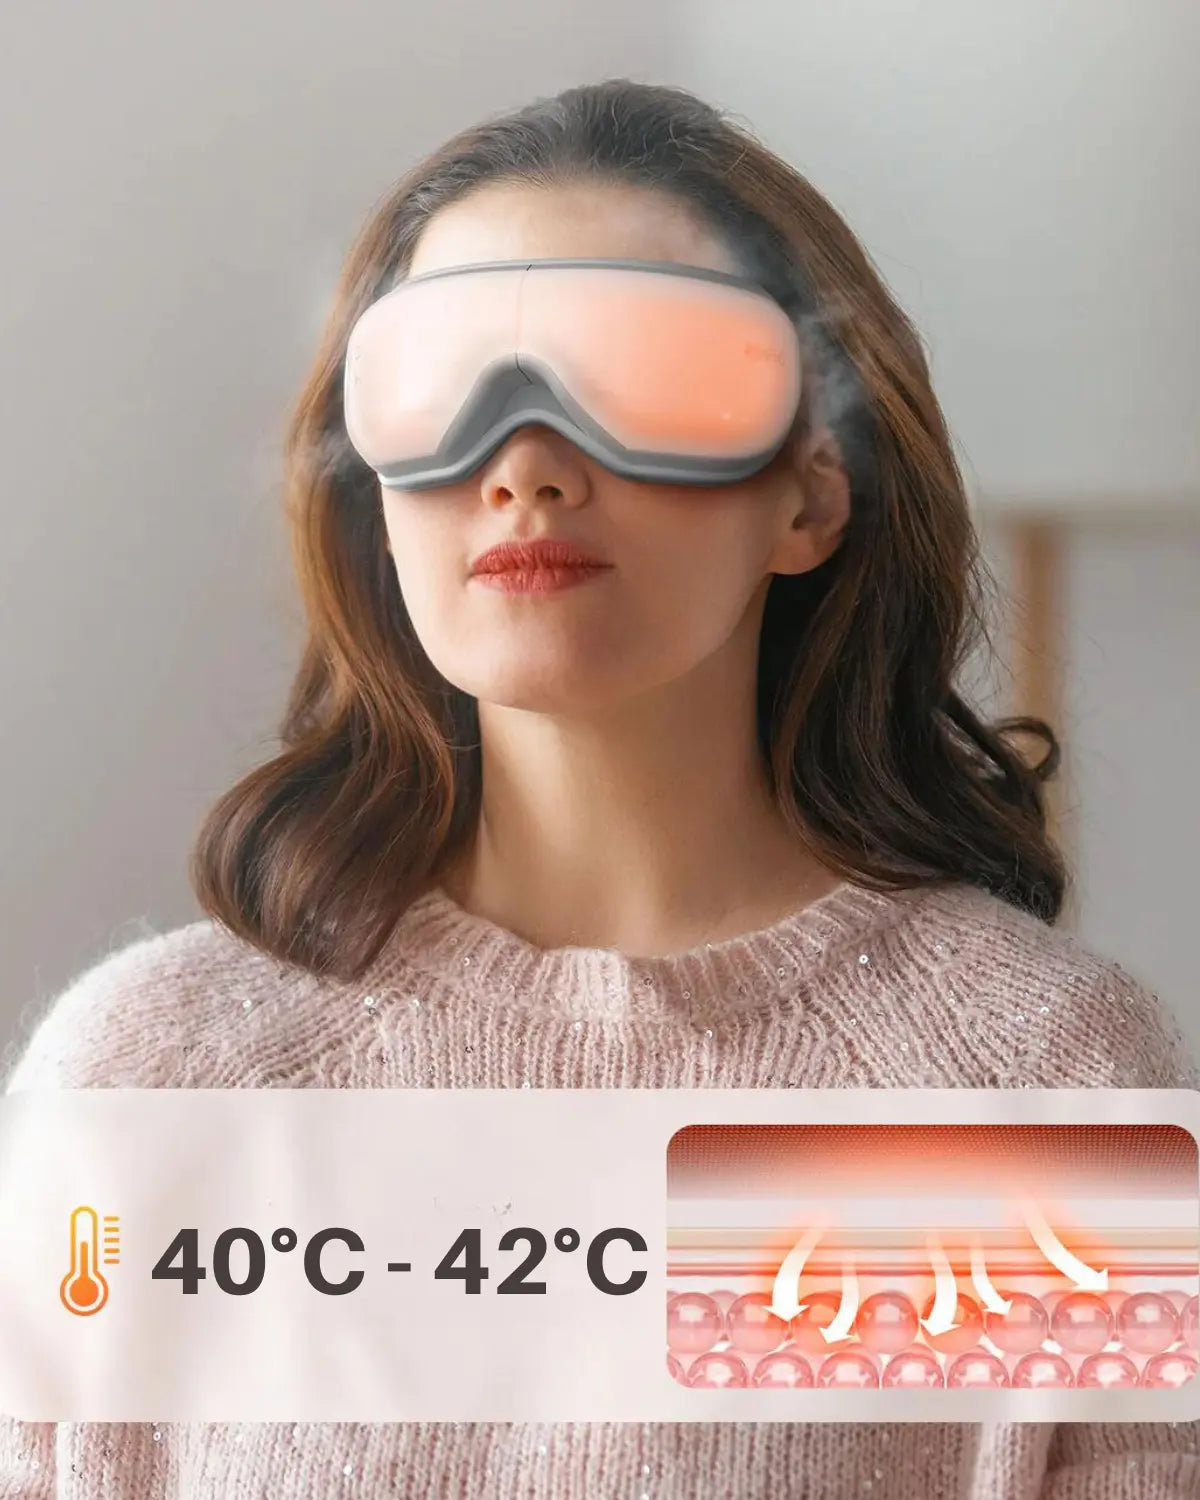 A woman with shoulder-length brown hair is wearing a high-tech Renpho EU Eyeris 1 Eye Massager with steam emanating from it, designed to relieve eye strain. She is indoors, dressed in a pink sweater. Below her image, a graphic shows the mask's temperature range from 40°C to 42°C and a visual representation of heat waves.